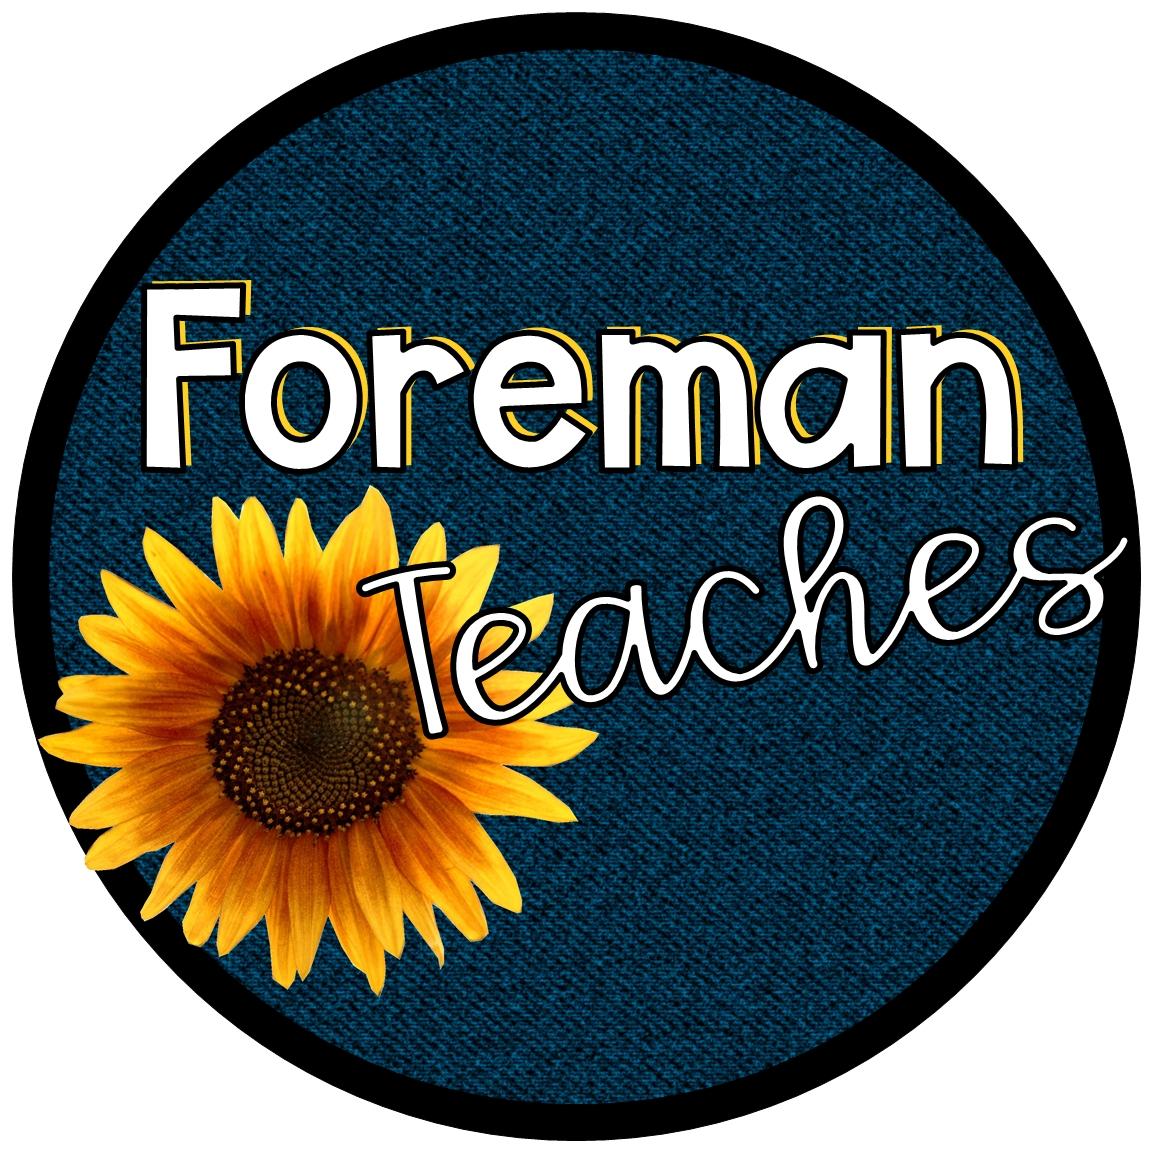 Foreman Teaches's images